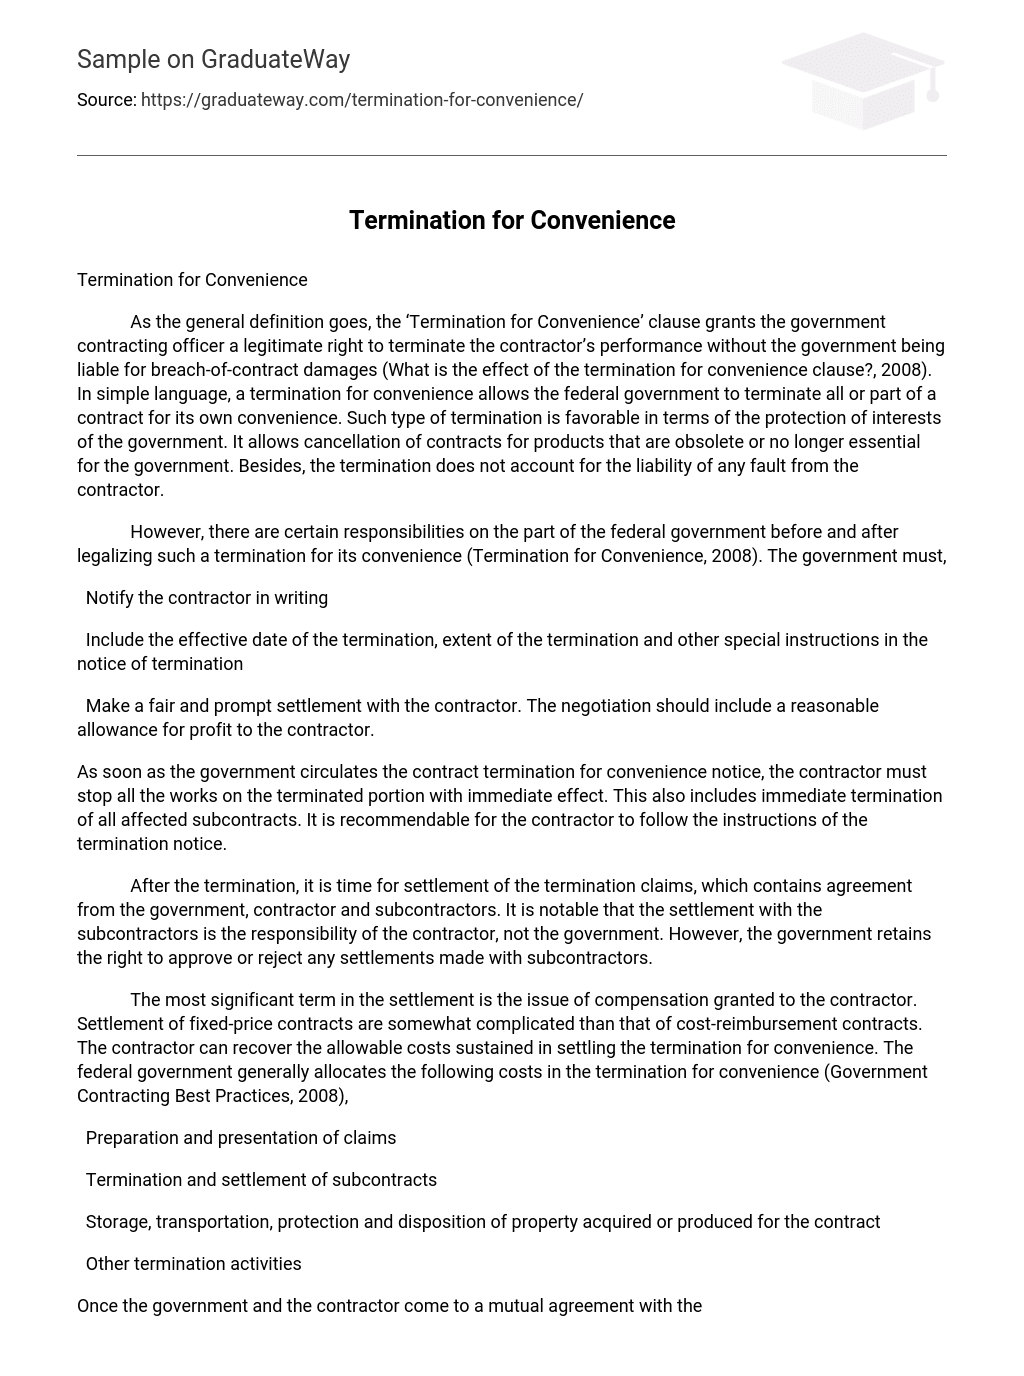 Termination for Convenience